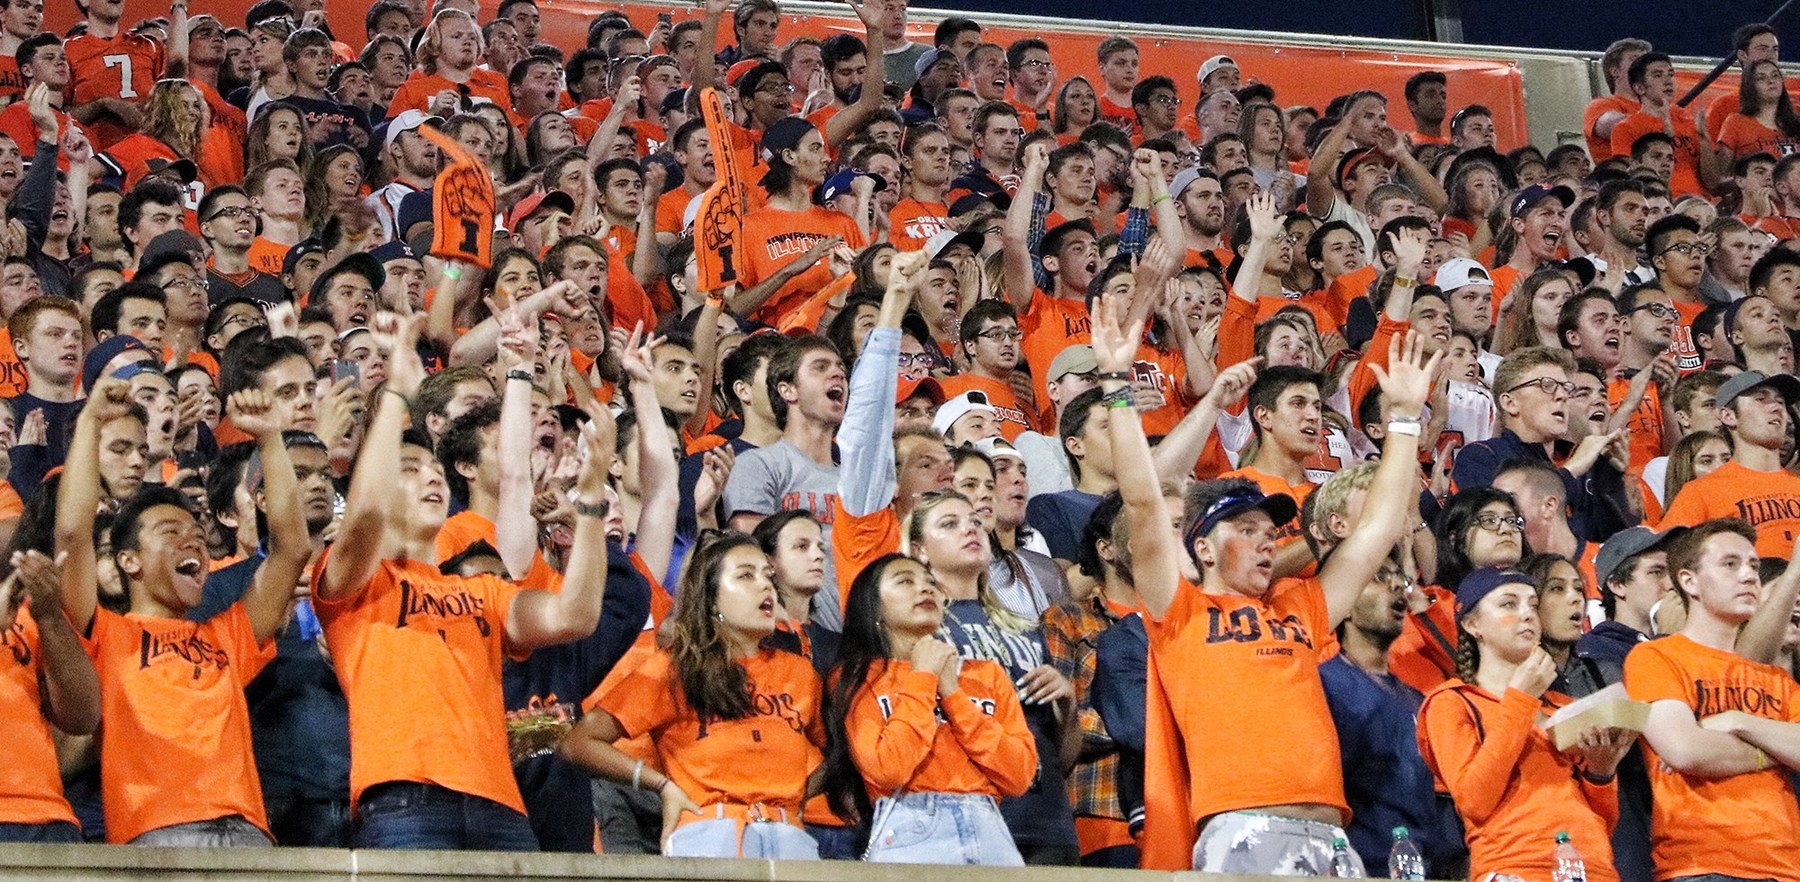 student seating section at an Illini Football game